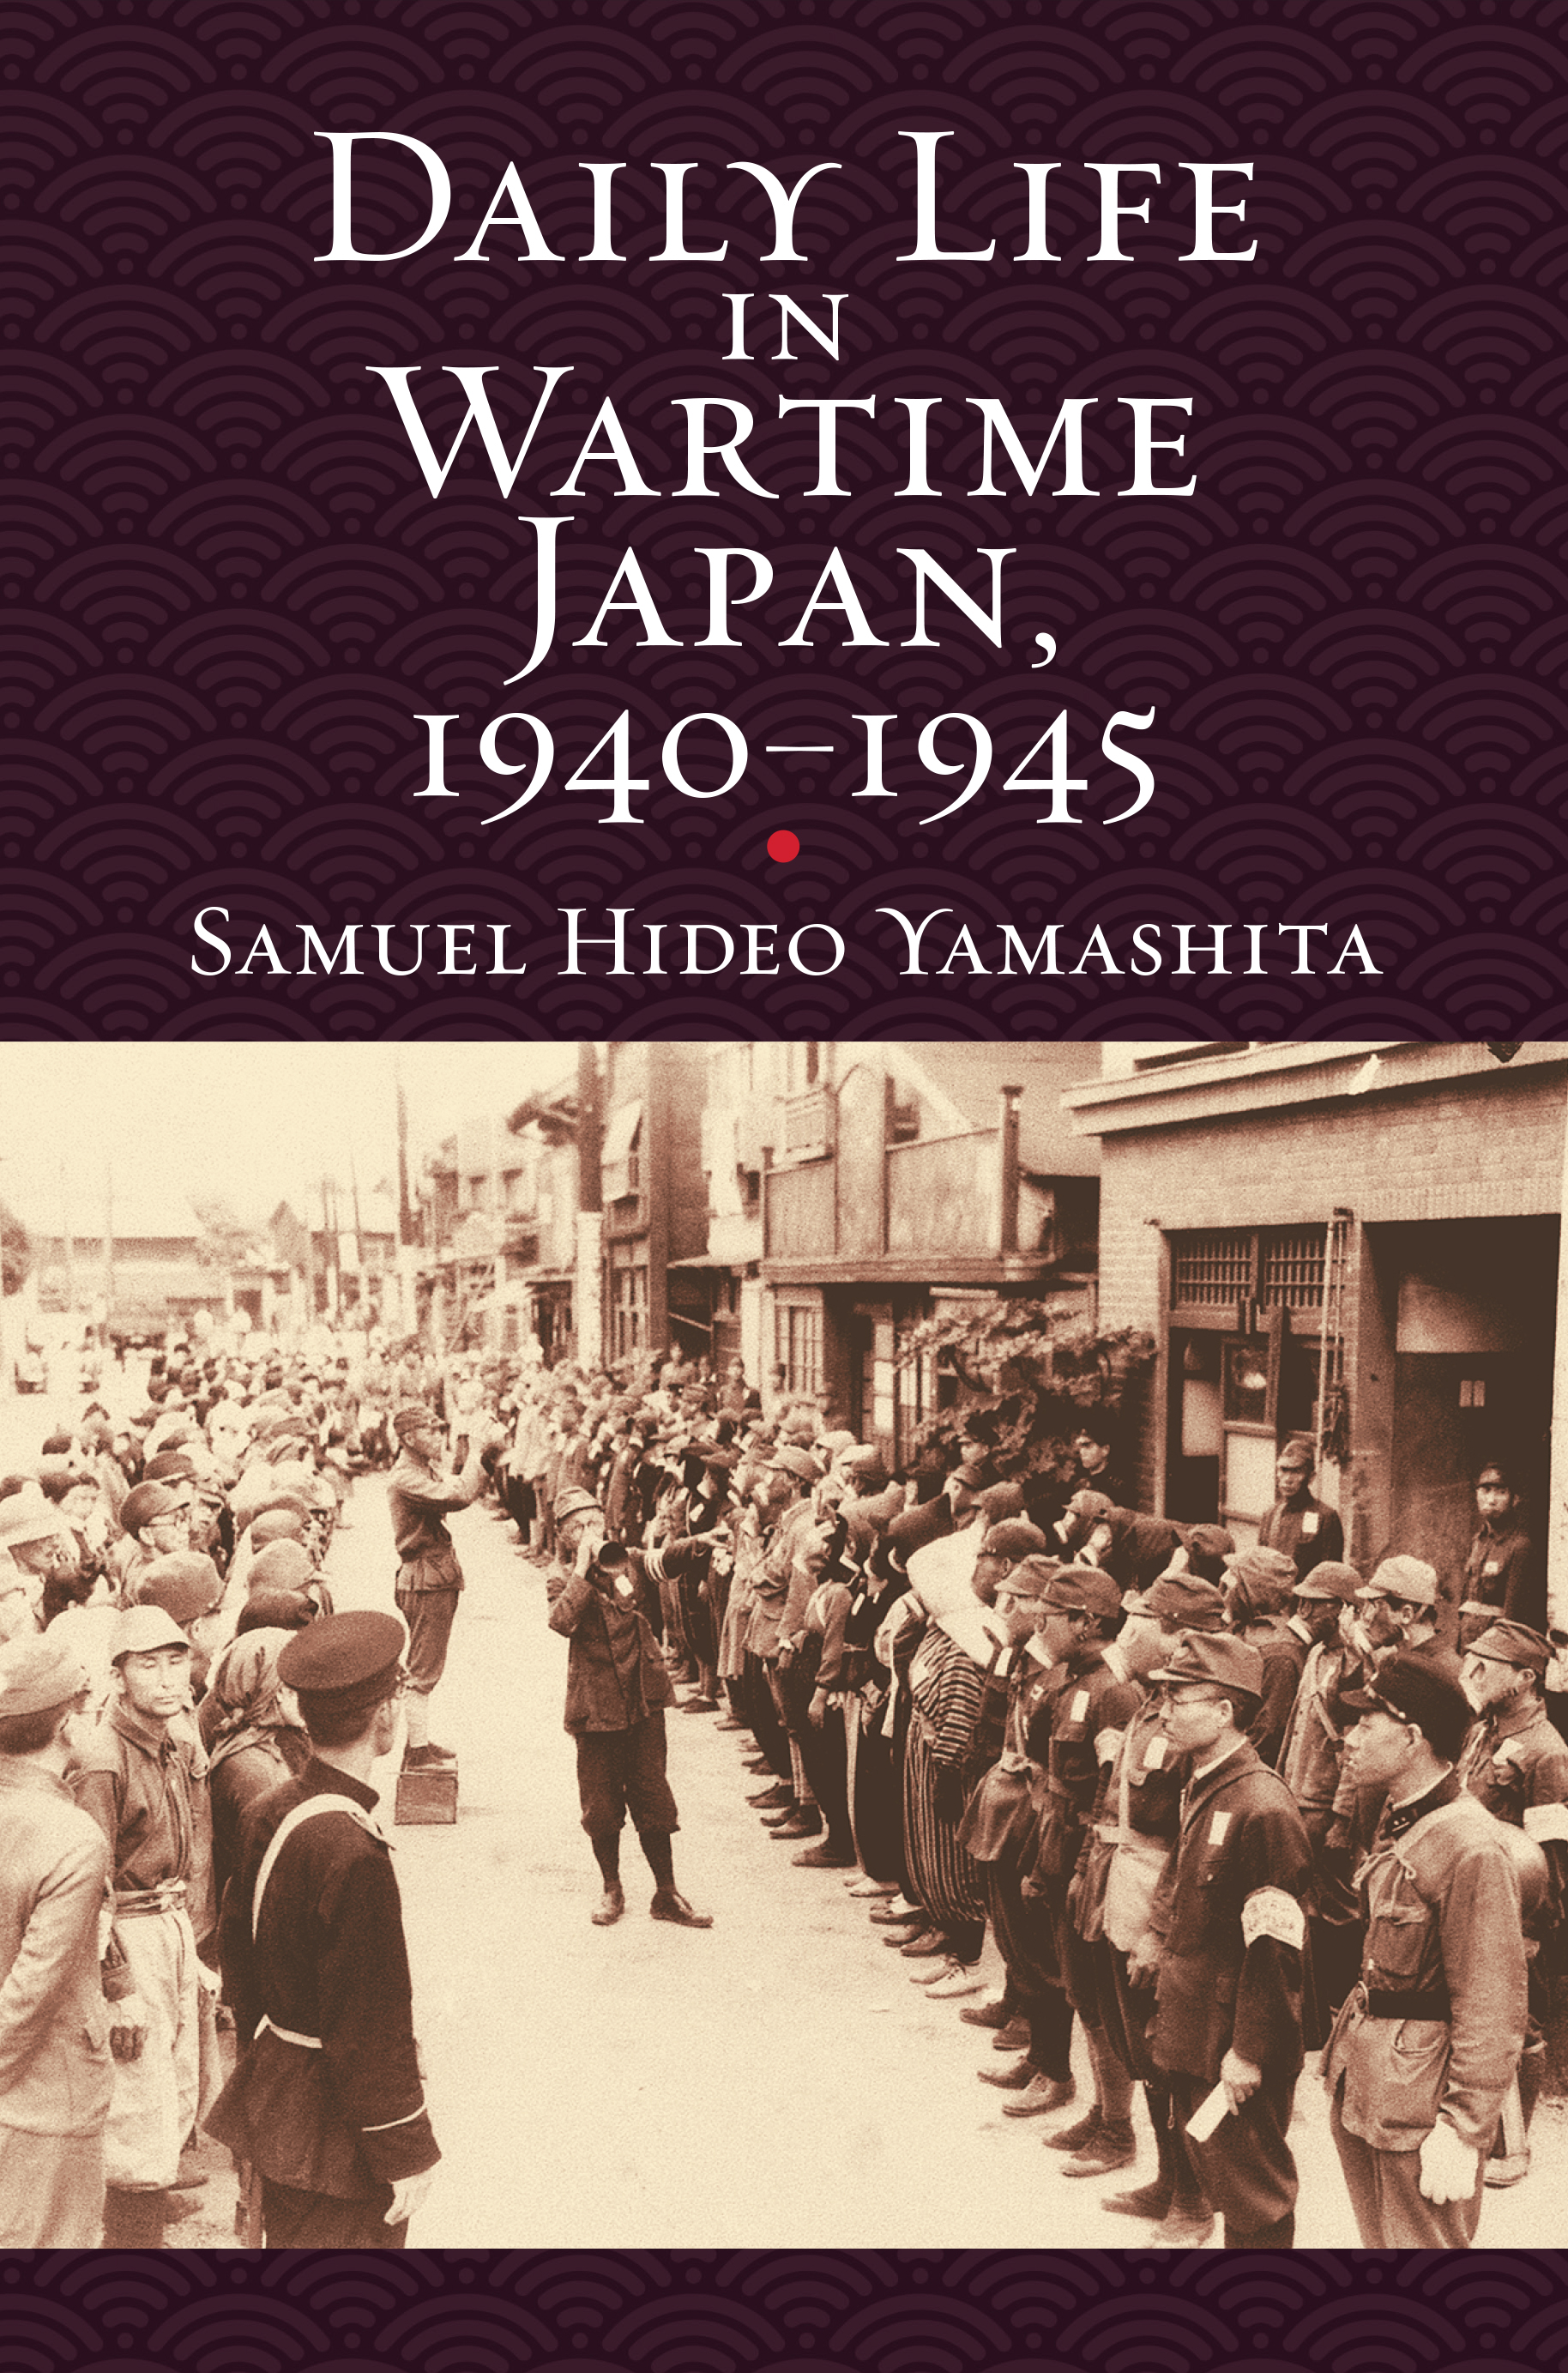 Daily Life in Wartime Japan, 1940-1945